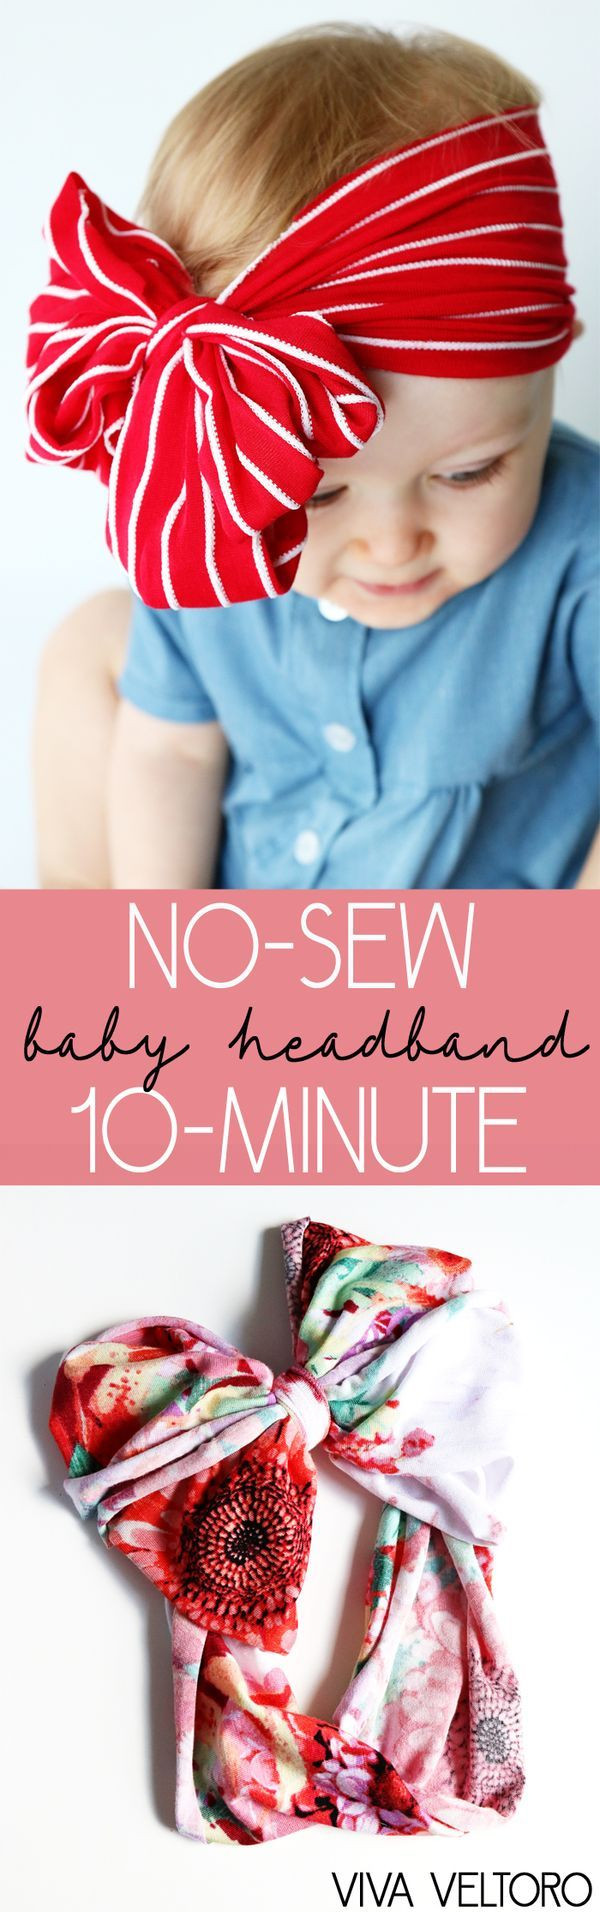 Baby Girl Headbands Diy
 How to Make Baby Headbands Without Sewing